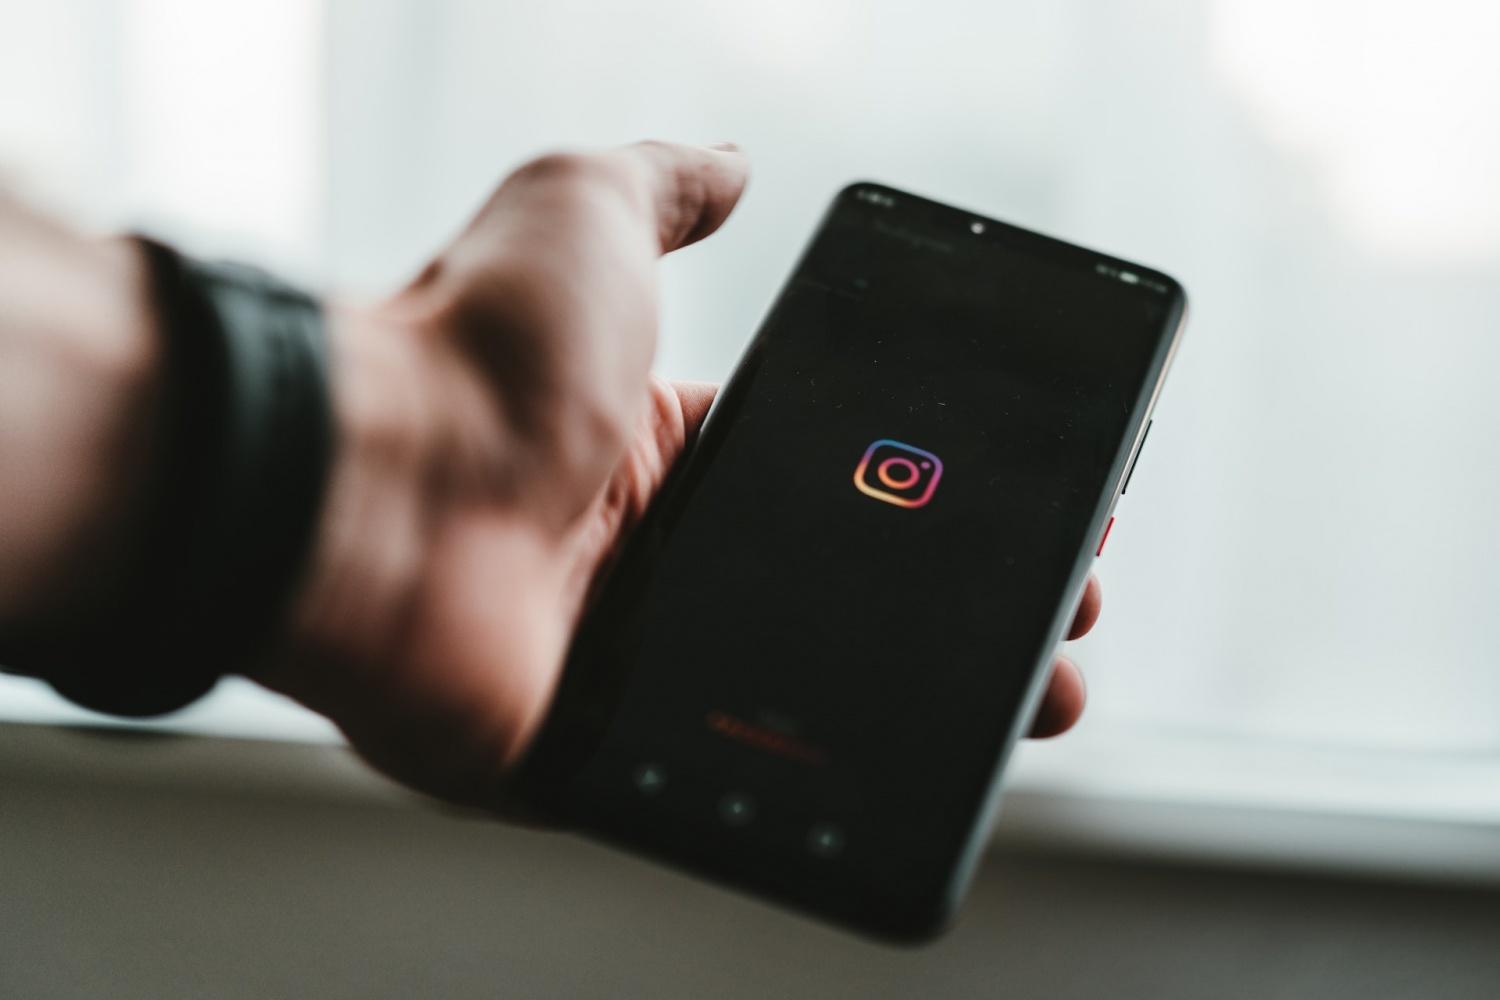 Instagram New Feature: Explore Feed Cleanup Being Tested